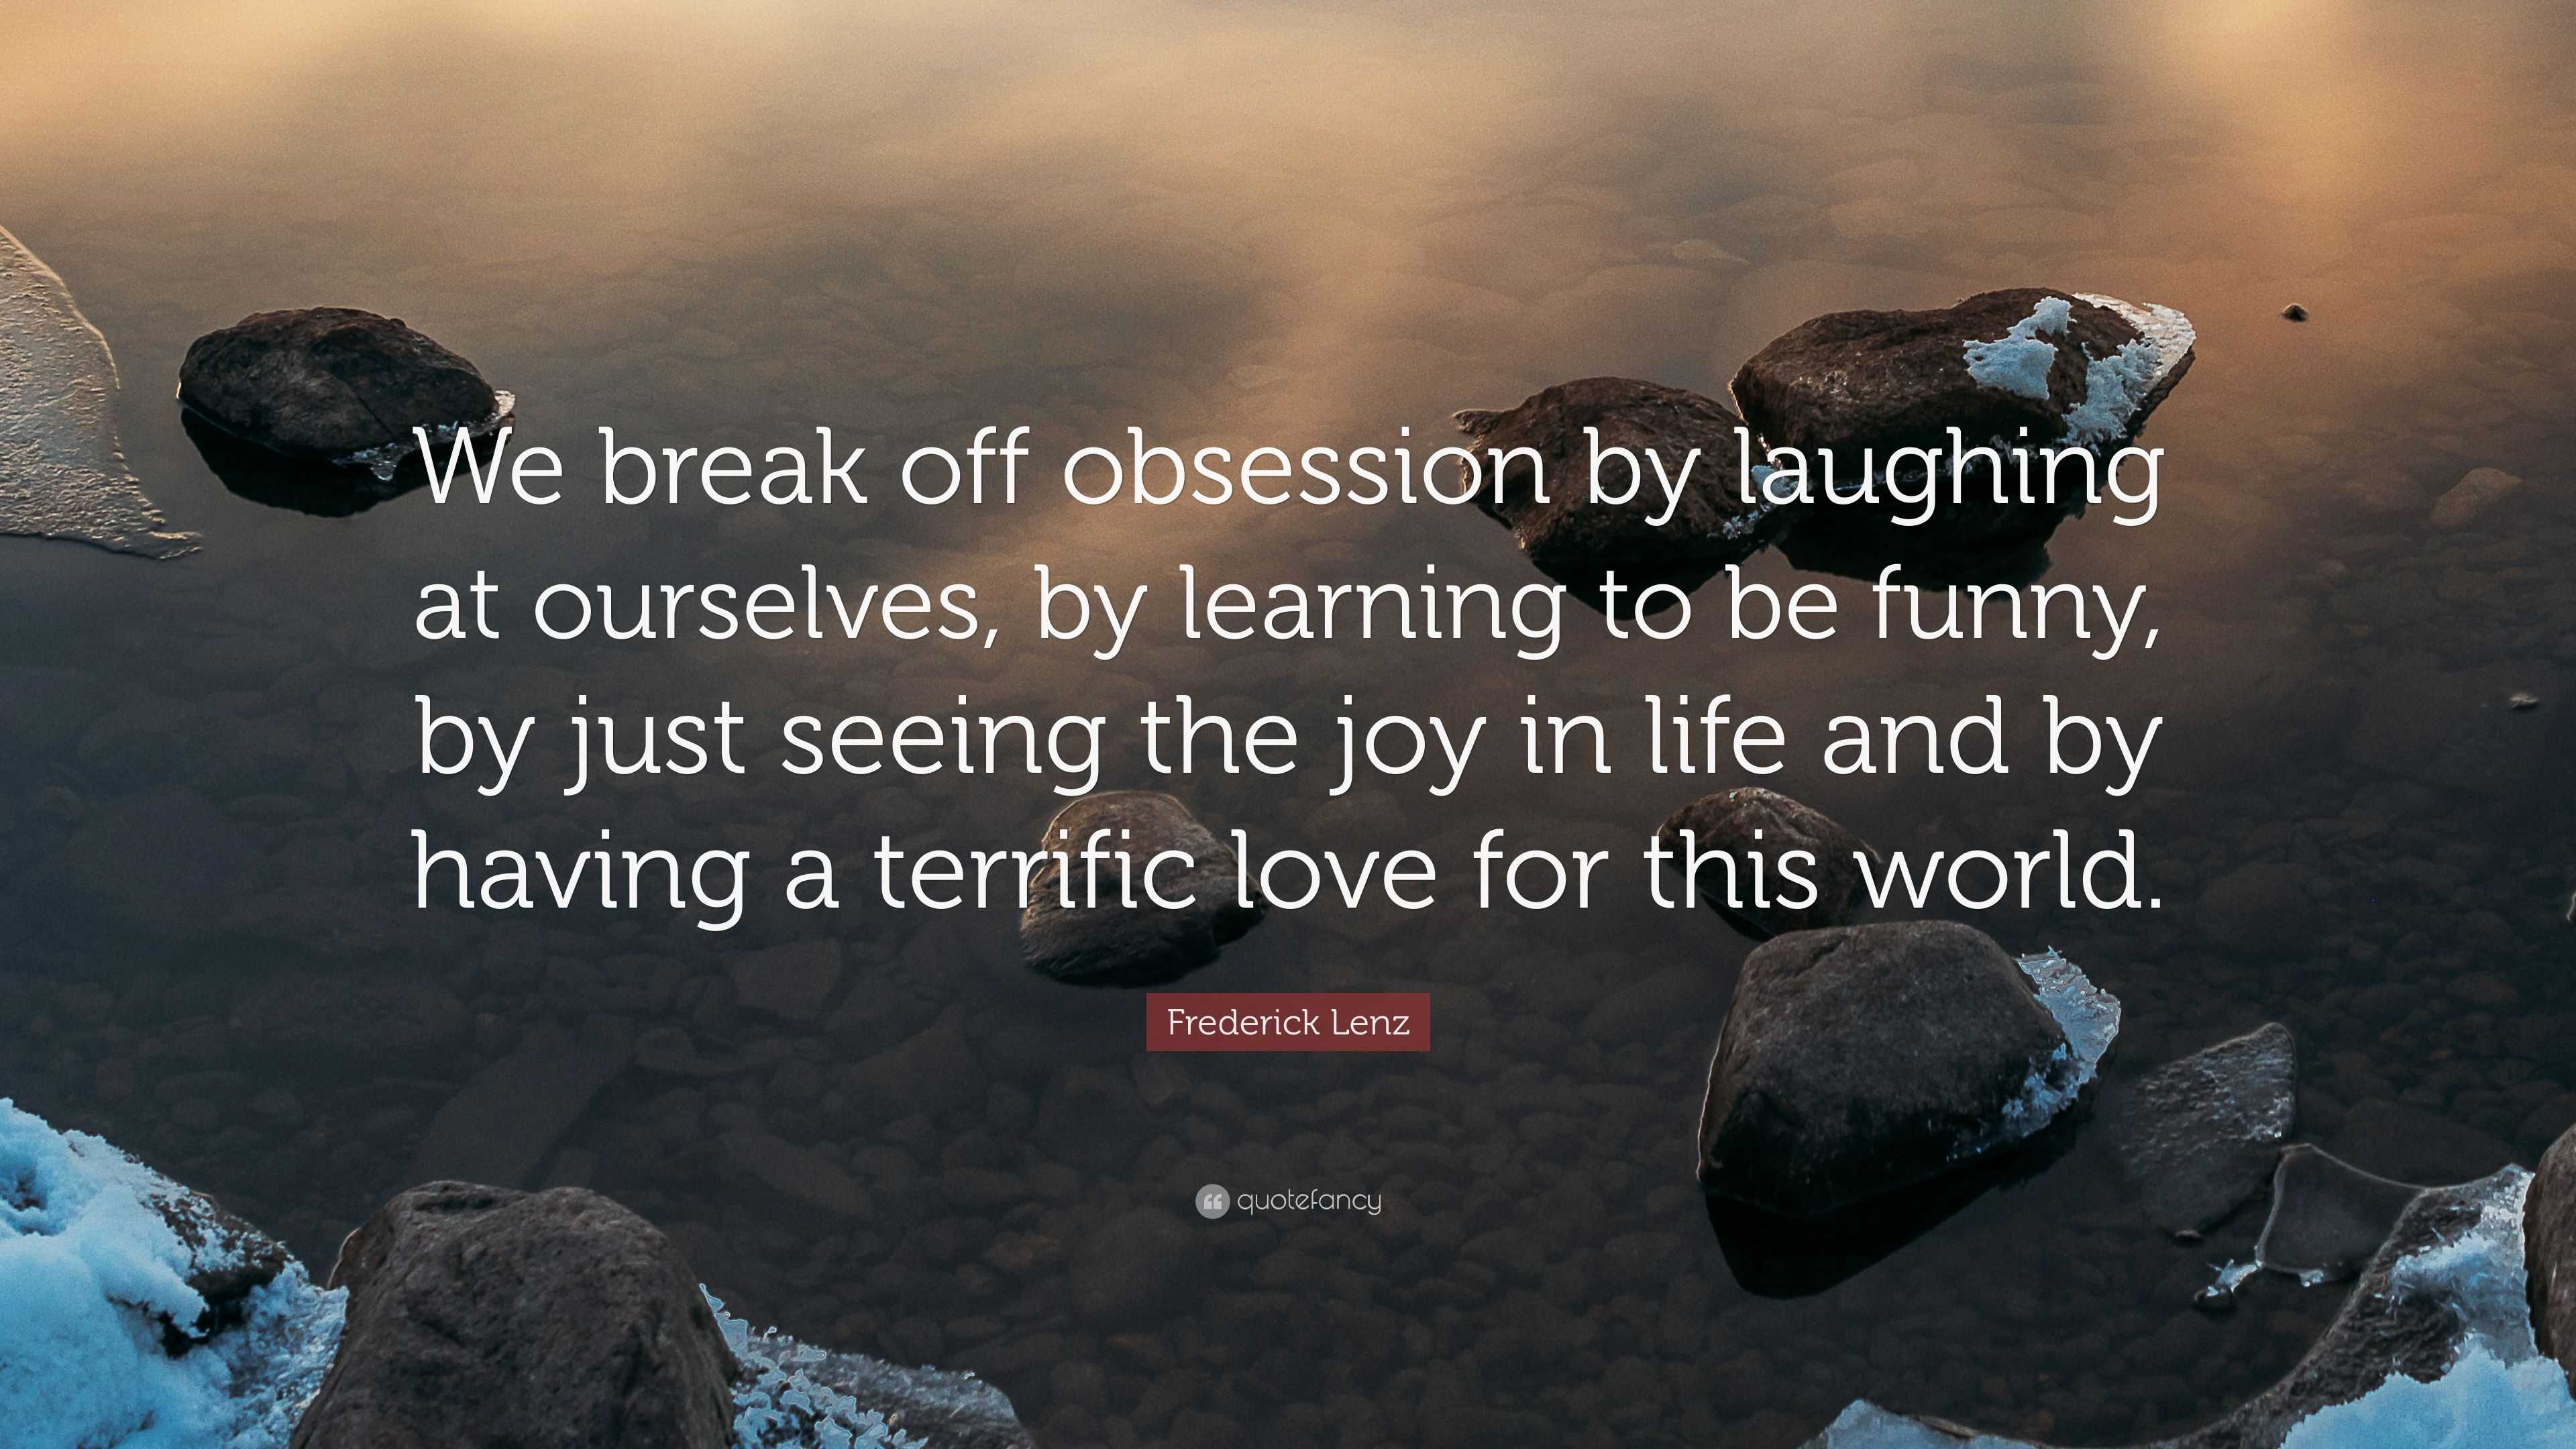 Frederick Lenz Quote: “We break off obsession by laughing at ourselves, by  learning to be funny, by just seeing the joy in life and by having a...”